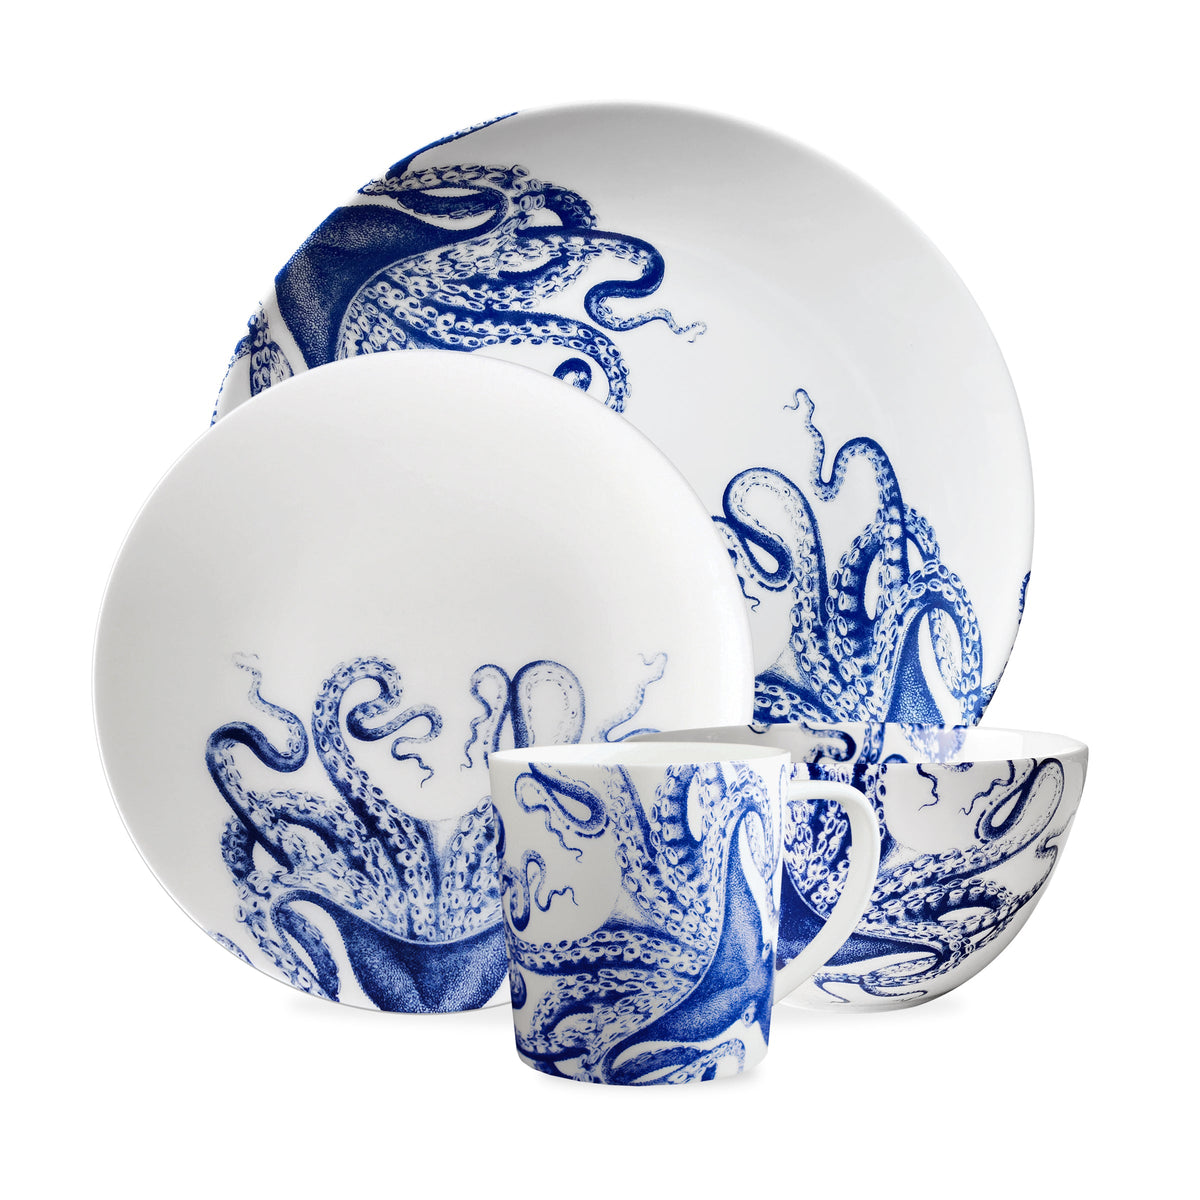 A Lucy 4-Piece Place Setting by Caskata Artisanal Home, featuring a blue and white octopus design.